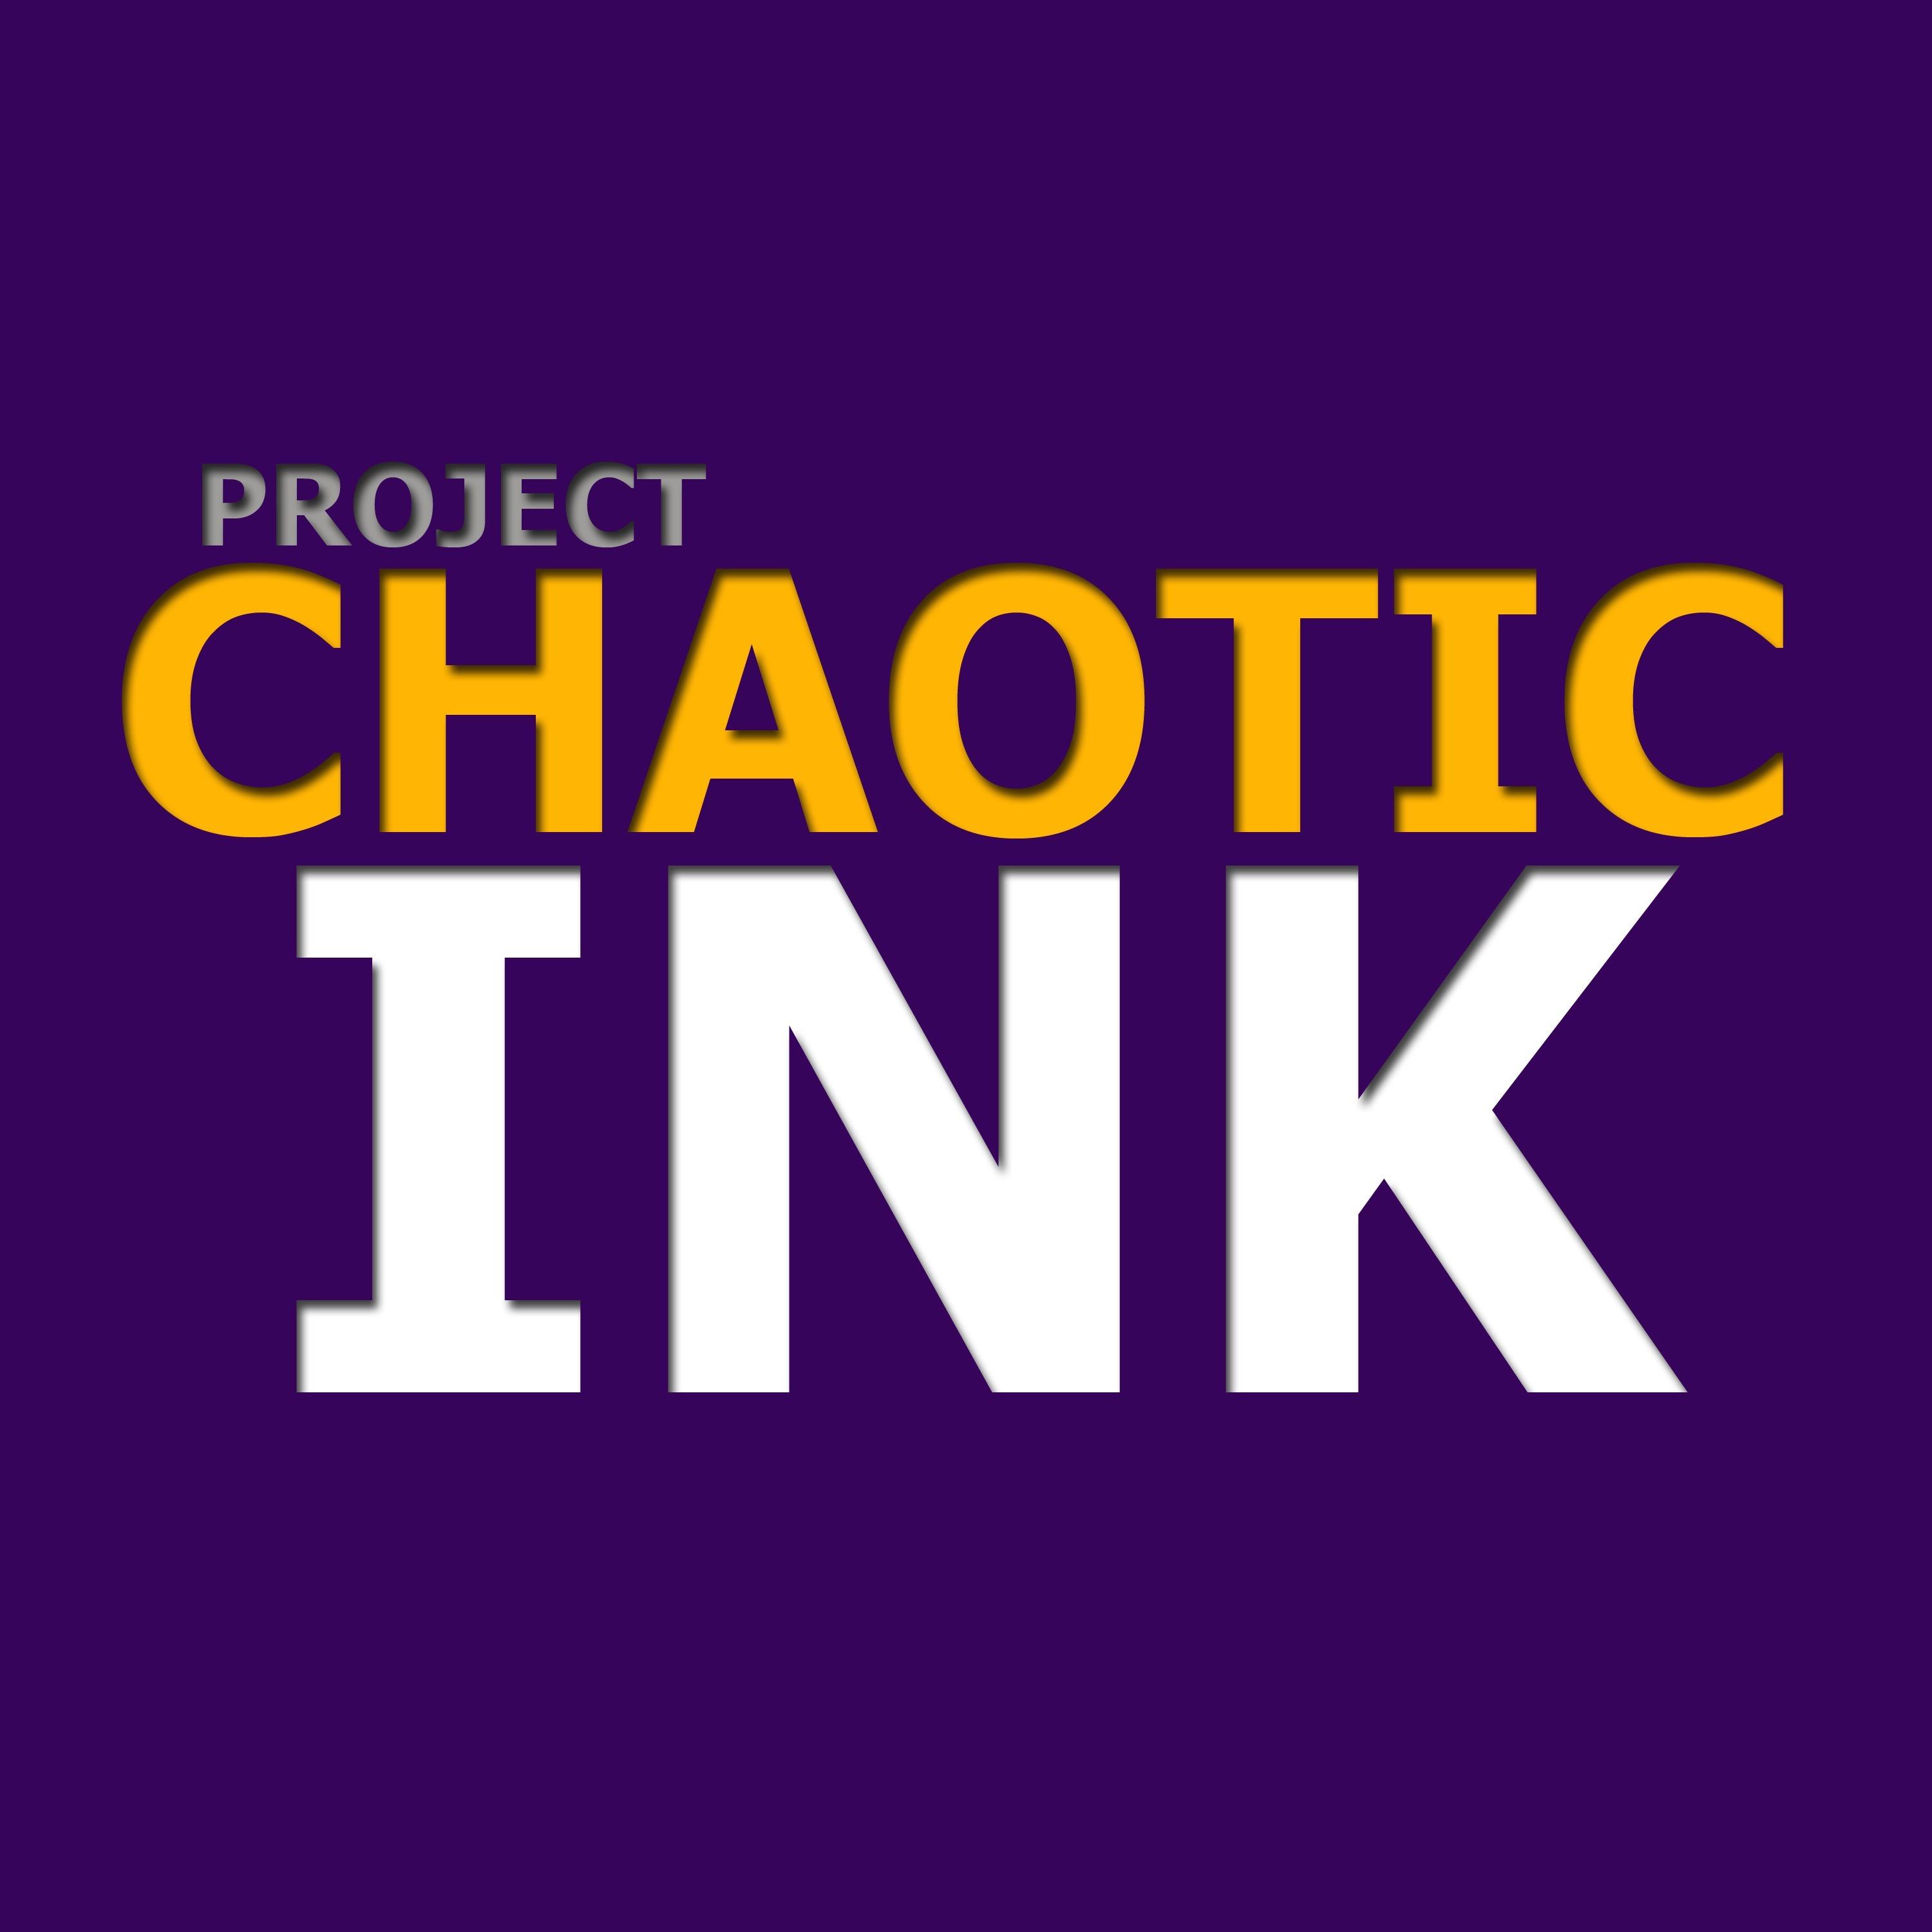 Chaotic INK